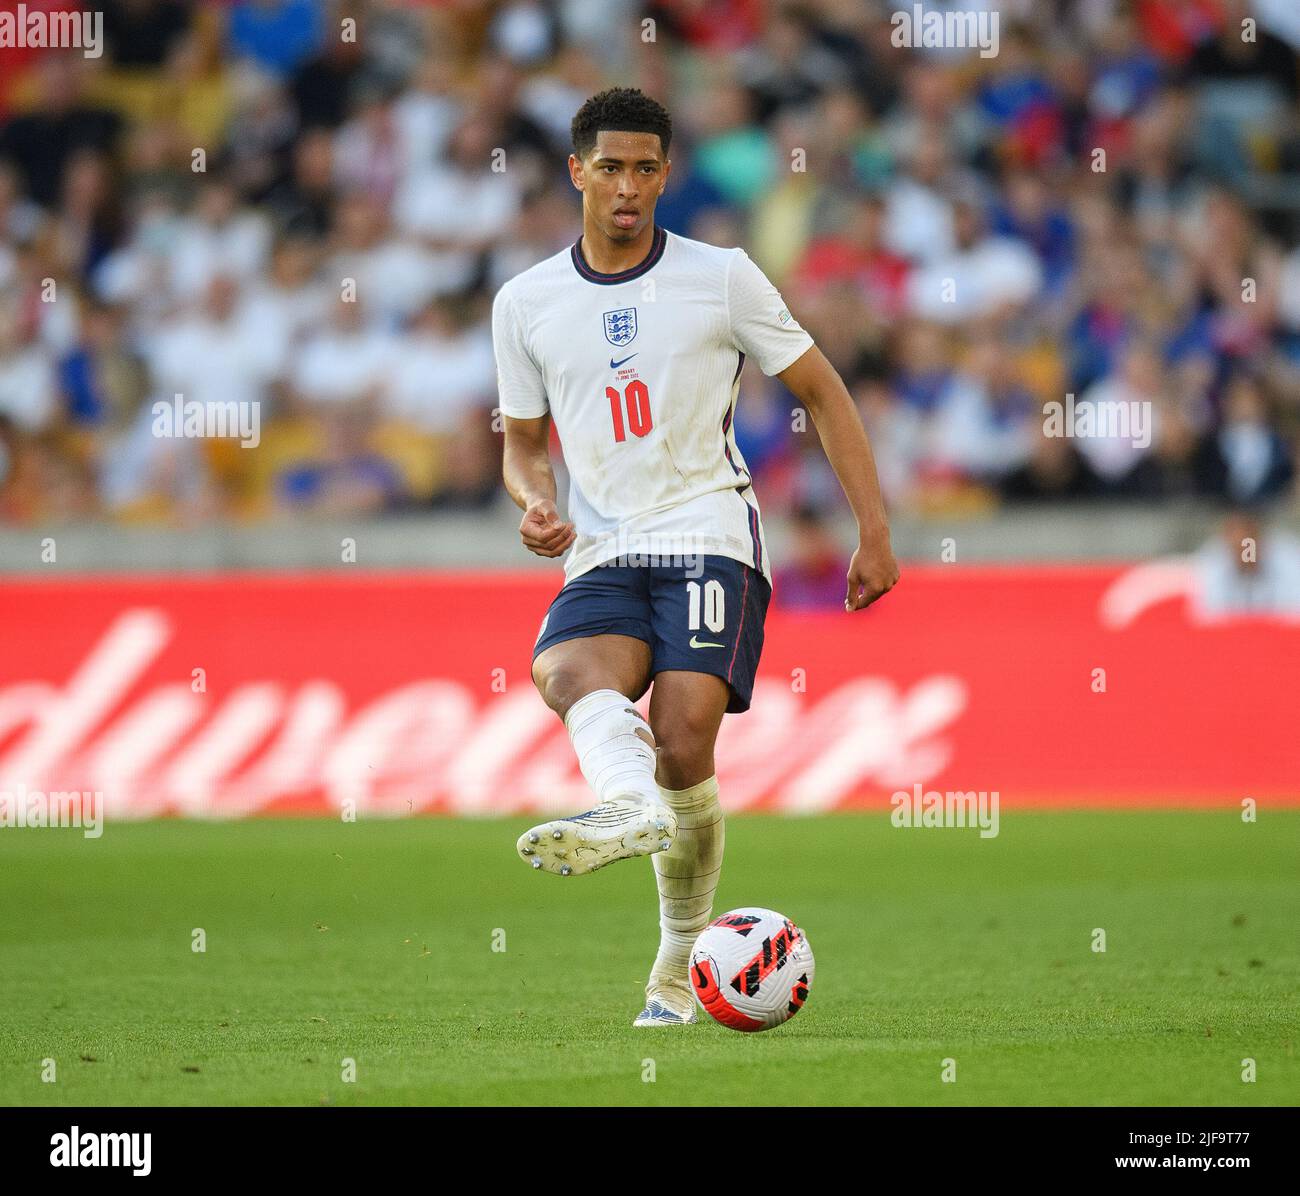 England v Hungary - UEFA Nations League.14/6/22. Jude Bellingham during the Nations League match against Hungary. Pic : Mark Pain / Alamy. Stock Photo